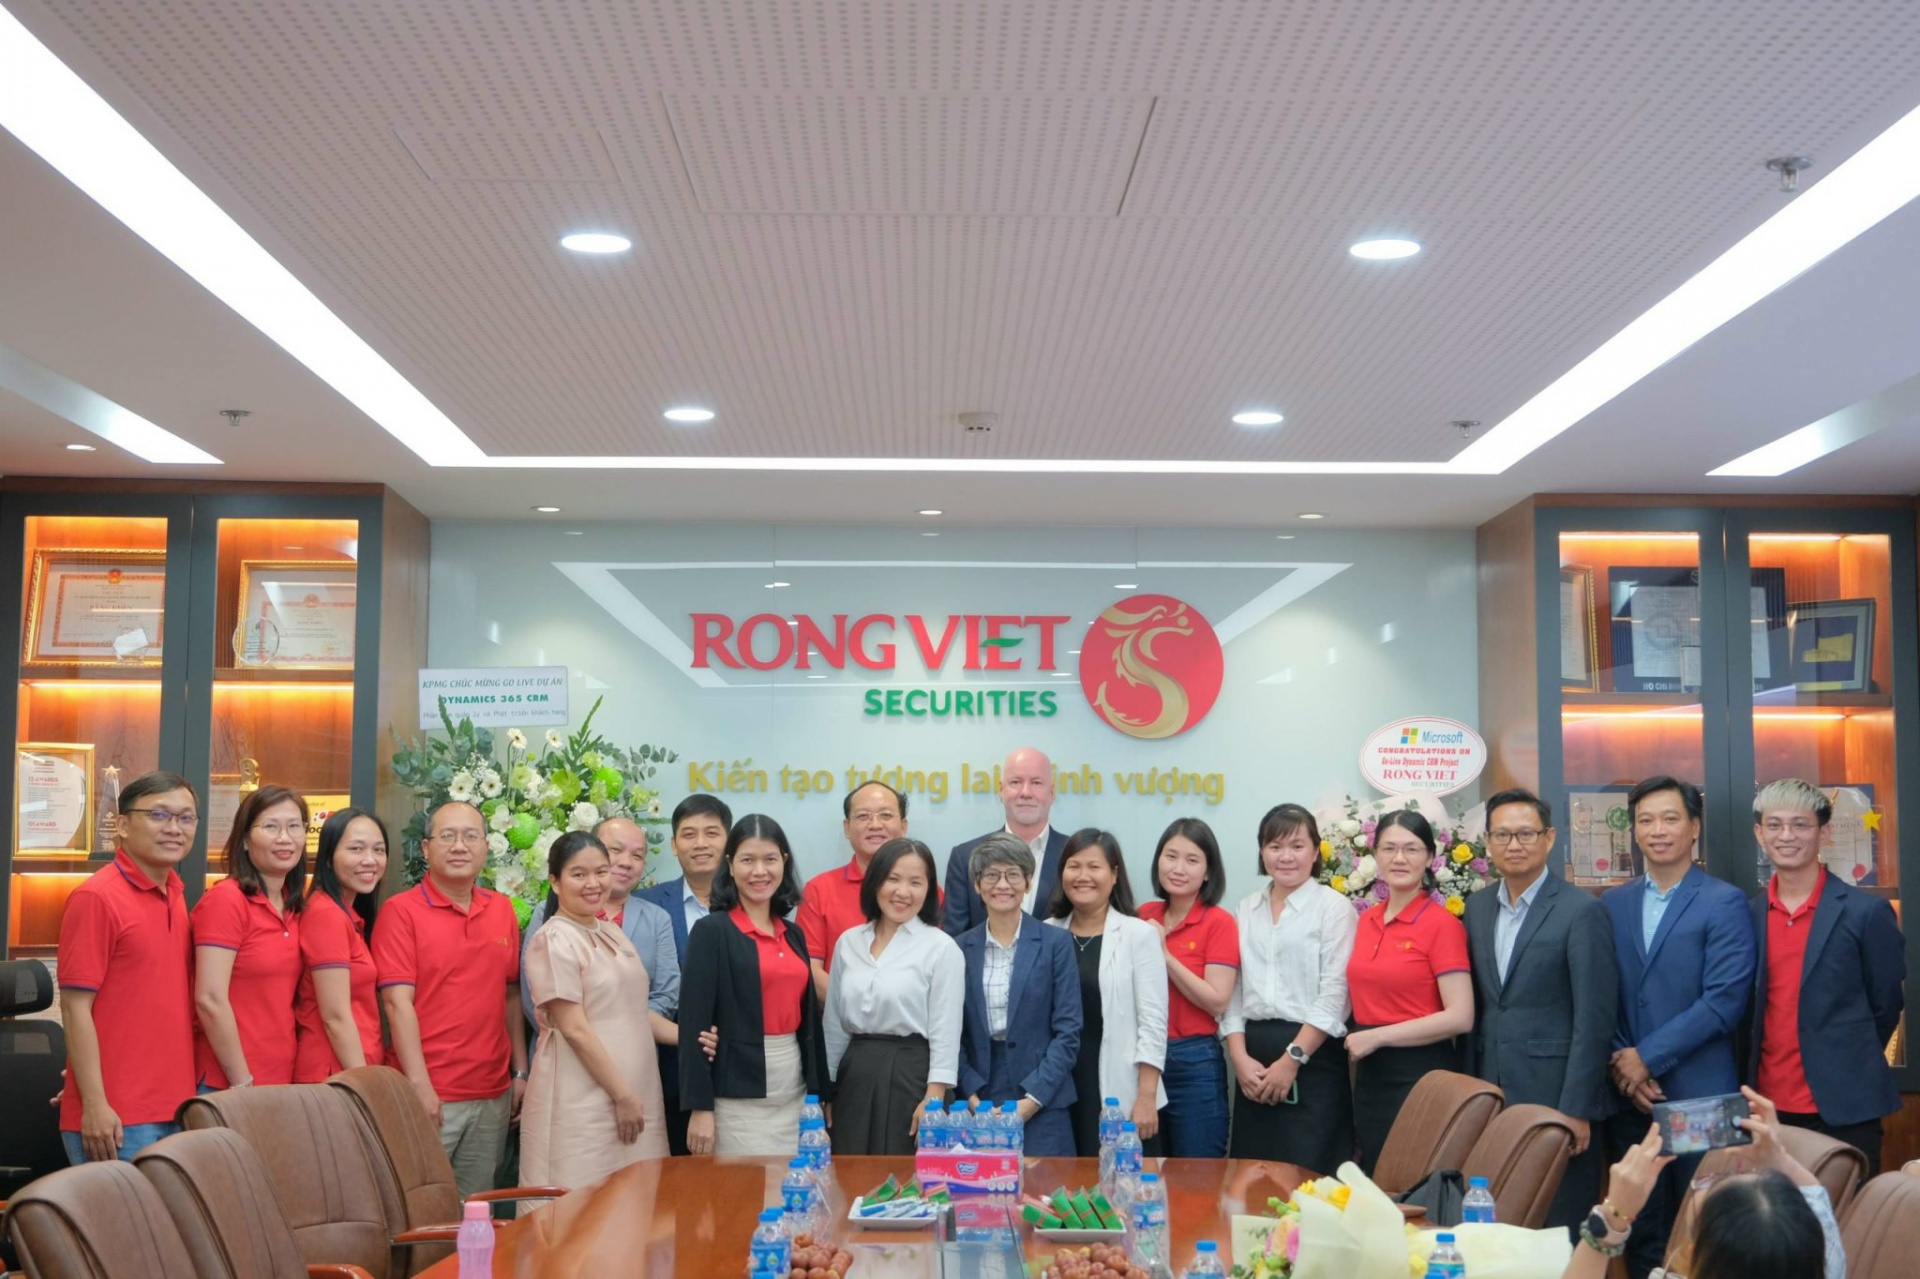 RongViet Securities officially go-live with the CRM System on the Microsoft Dynamics 365 platform